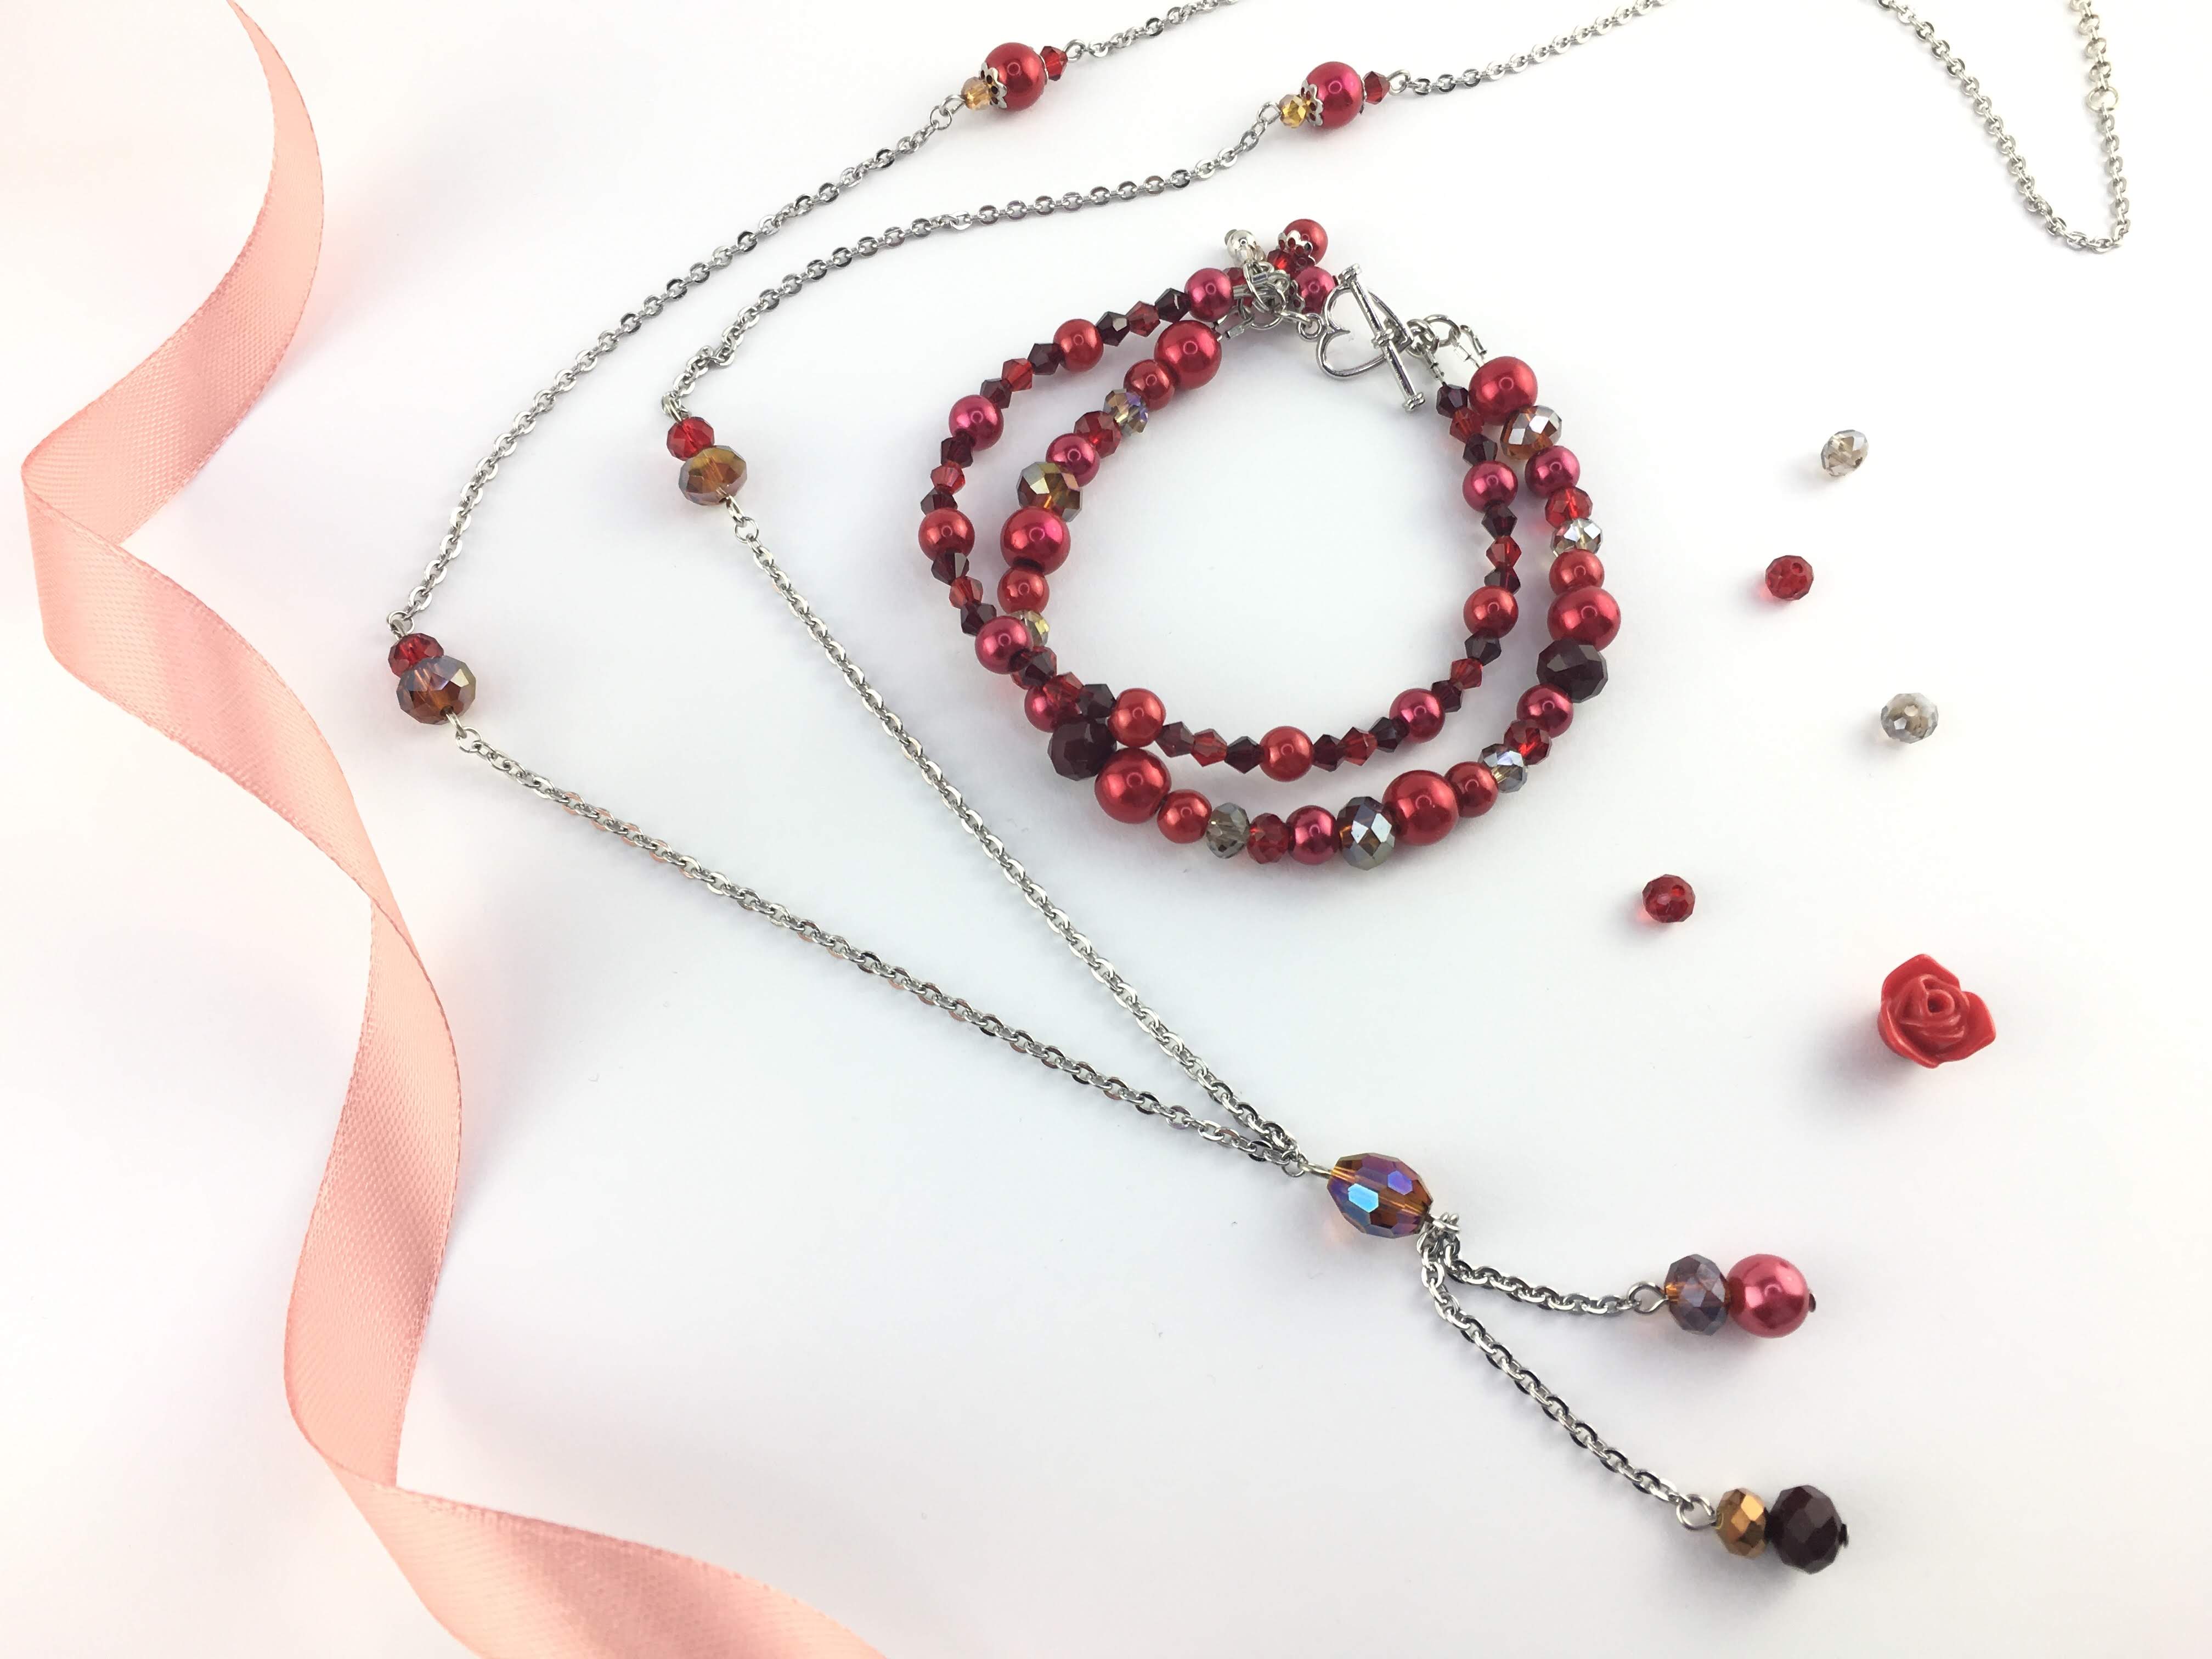 Deep Red Crystal and Pearls Dual Layer Bracelet and Chic Minimalist Necklace